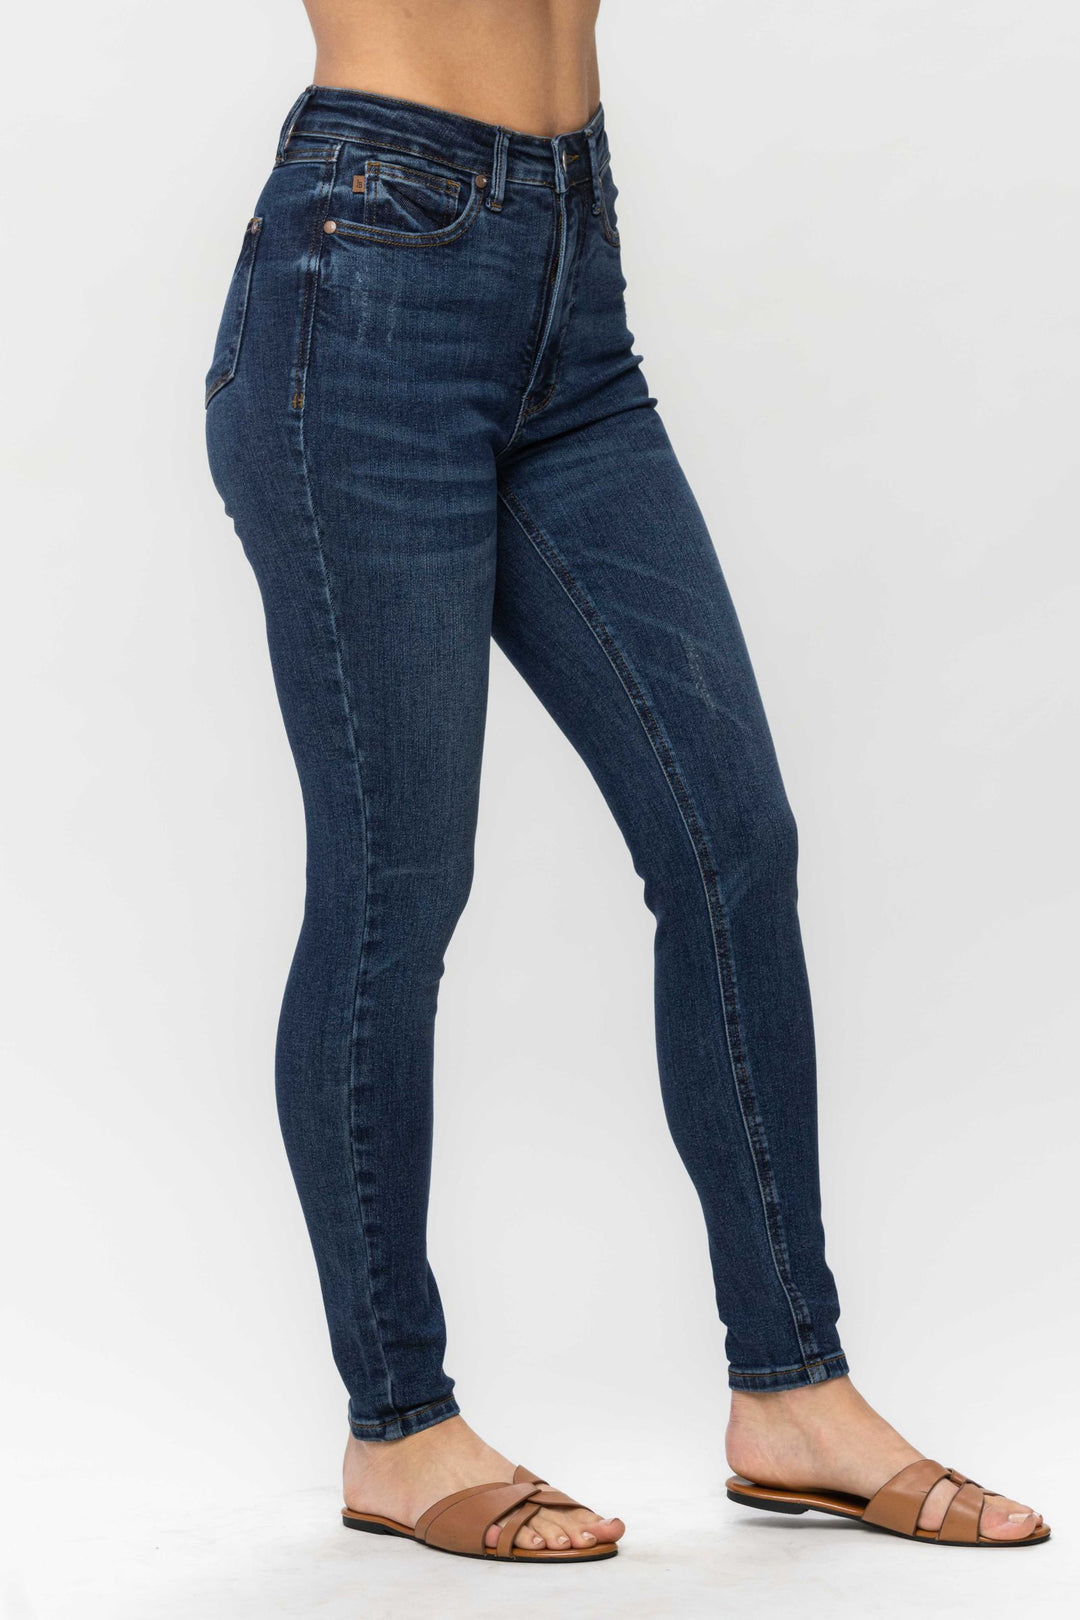 Judy Blue High Waist Skinny Jeans-Jeans-Judy Blue-Evergreen Boutique, Women’s Fashion Boutique in Santa Claus, Indiana